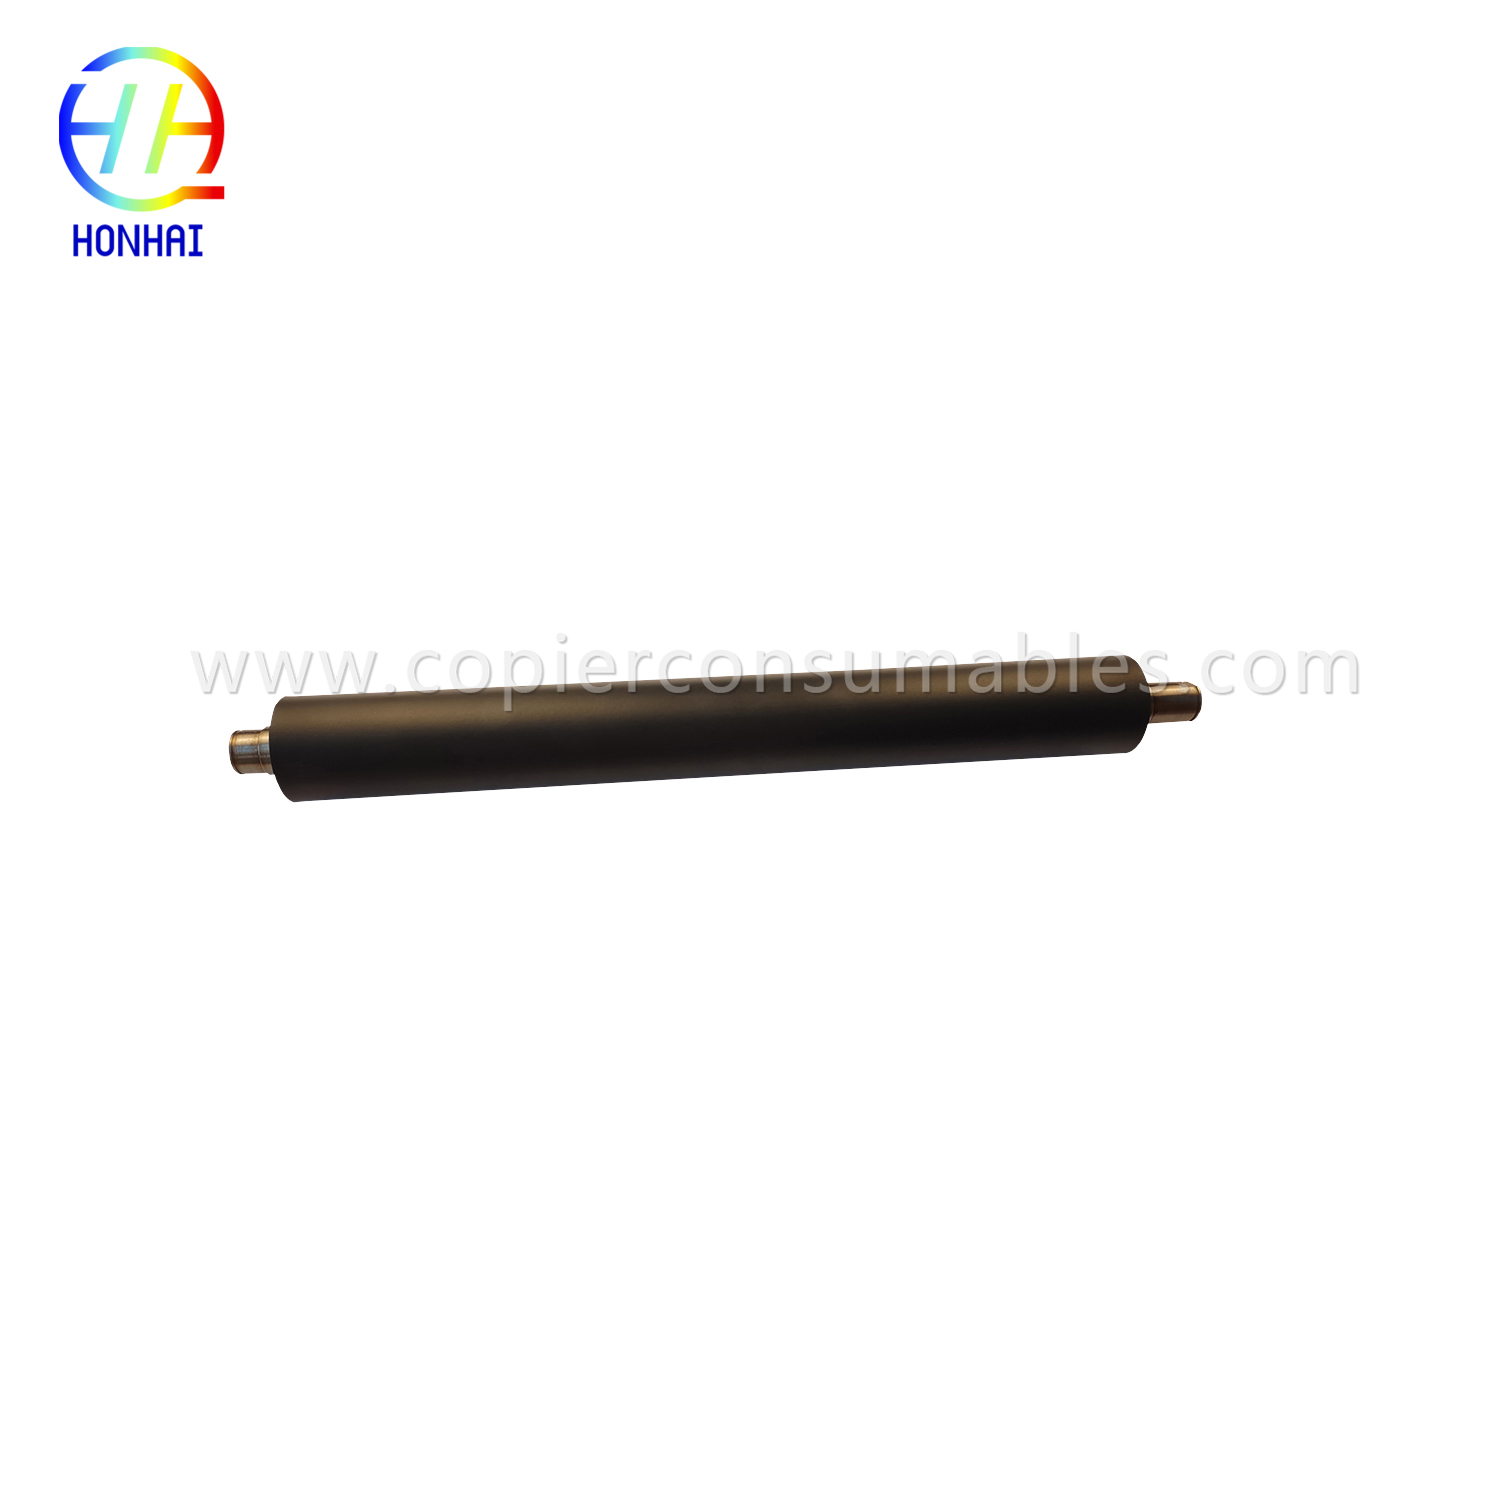 Pressure-Roller-Mo-Ricoh-Mpc4501-Mpc5501-Mp-C4501-C5501-Ae020183-Ae02-0183-Lower-Sleeved-Pressure-Roller(3) 拷贝